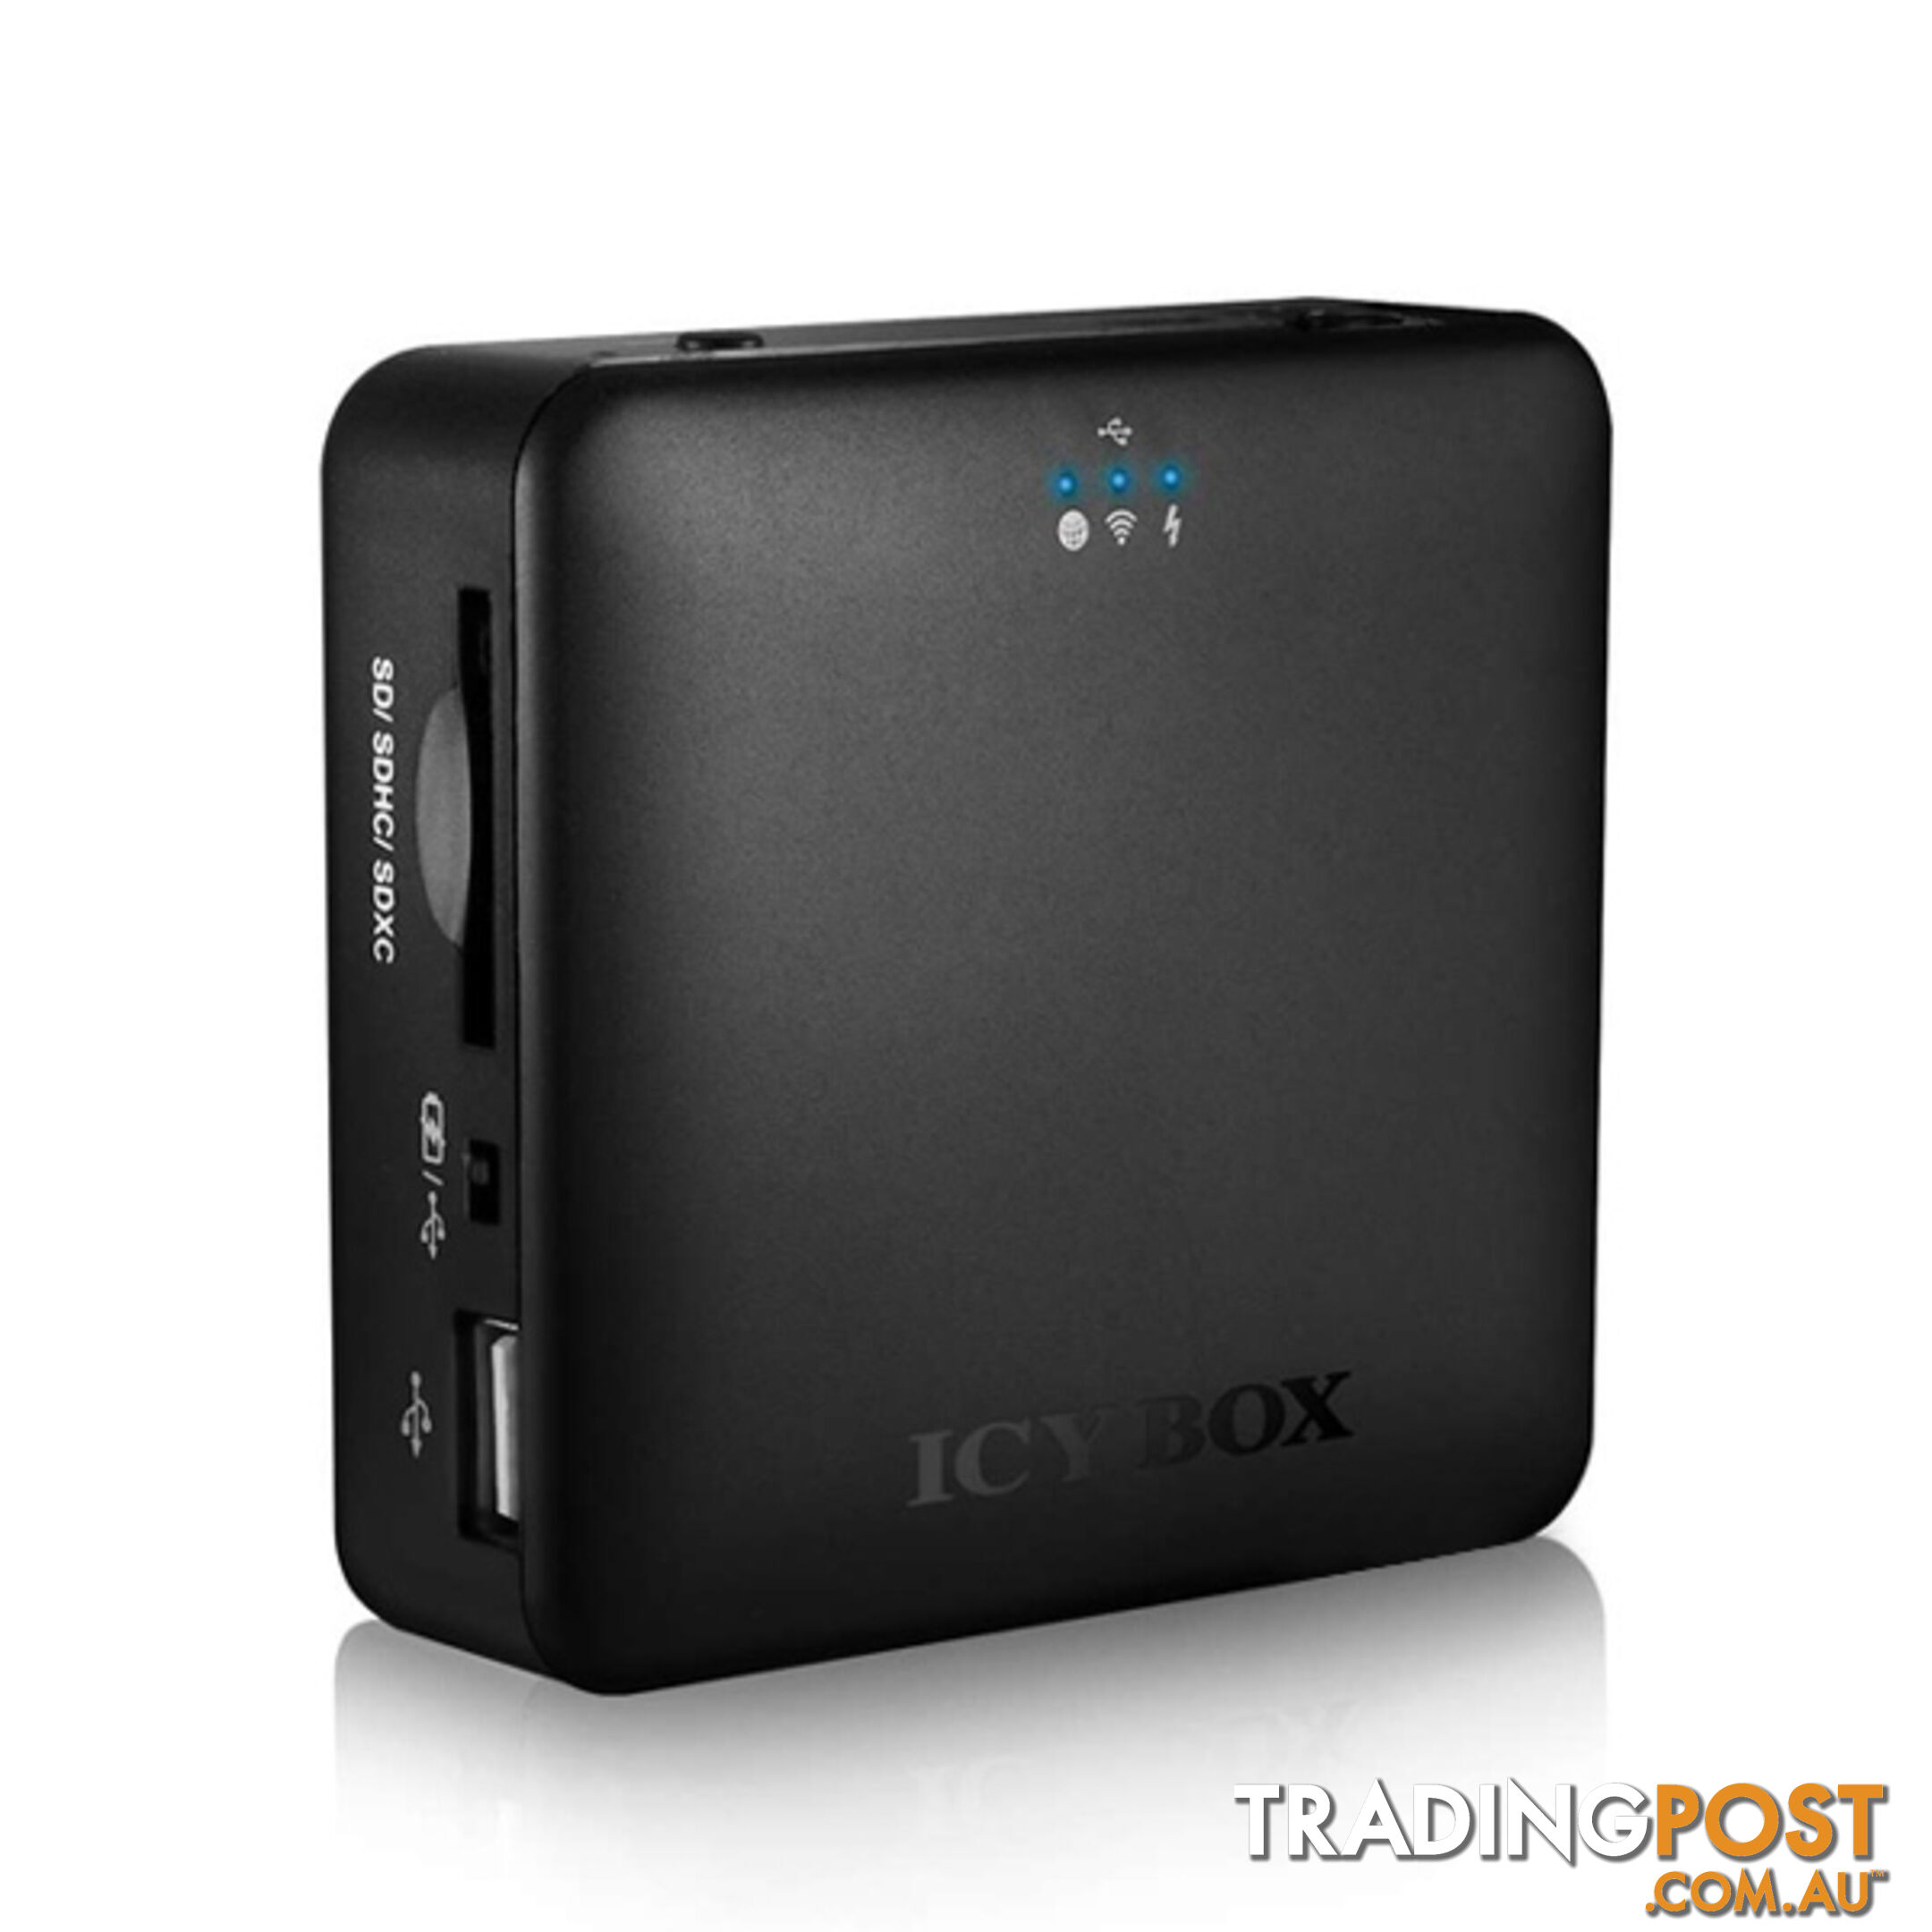 ICY BOX IB-WRP201SD WiFi-Station for SD cards, Access Point and Power Bank